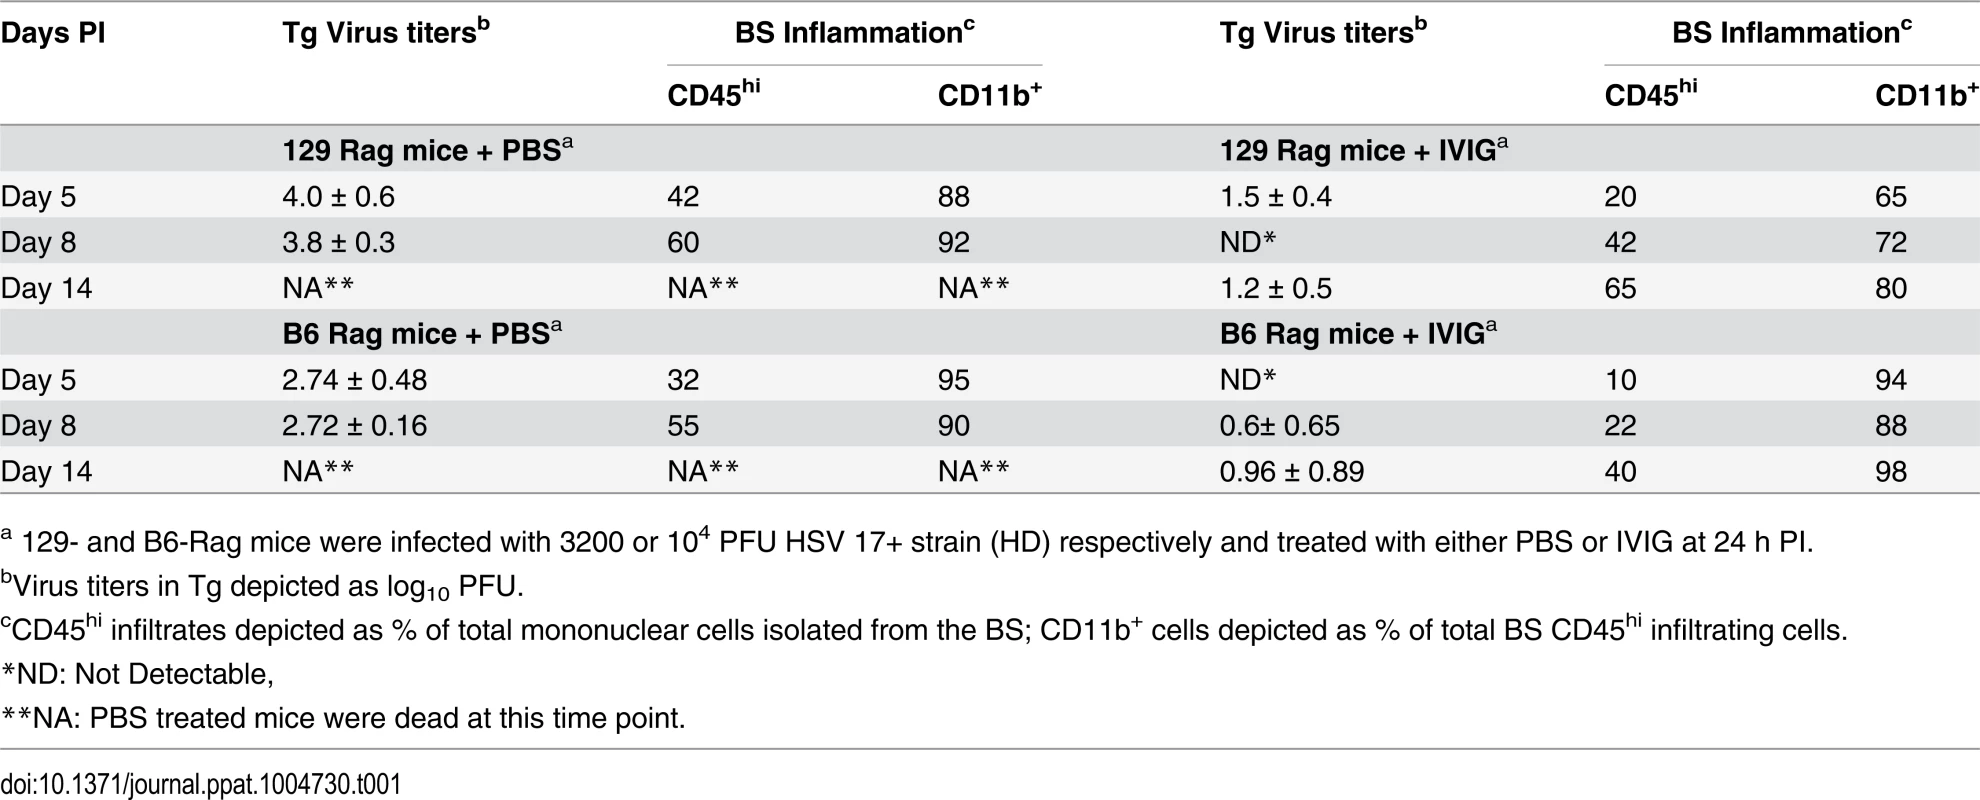 Tg virus titers and BS inflammation in Rag mice.